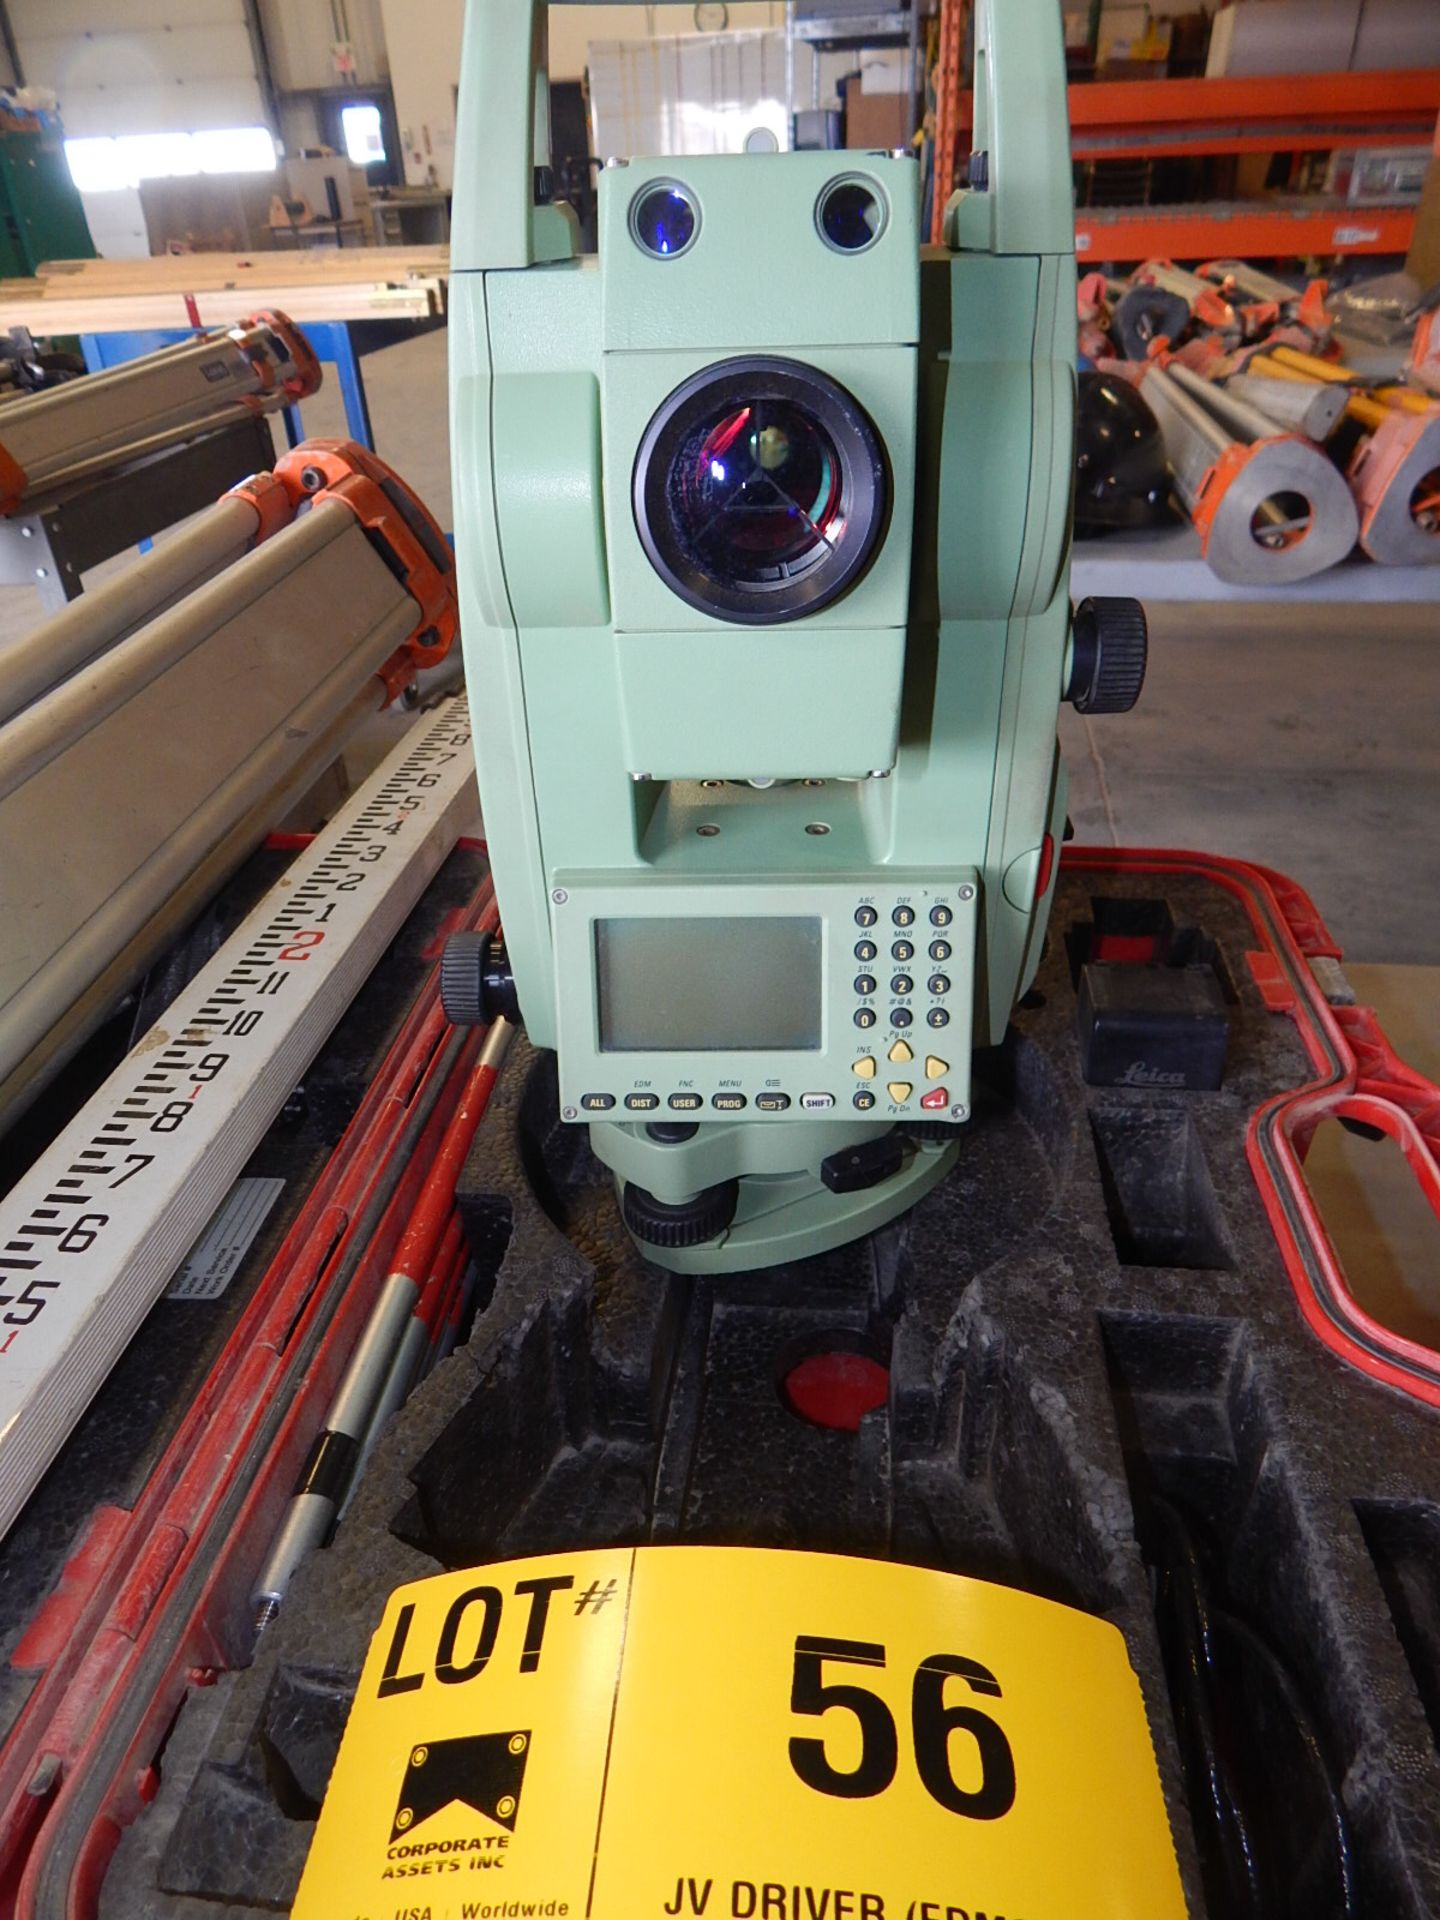 LOT/ LEICA TCRA703POWER TOTAL STATION WITH DIGITAL DISPLAY, TRIPOD AND GRADING STICK - Image 4 of 5